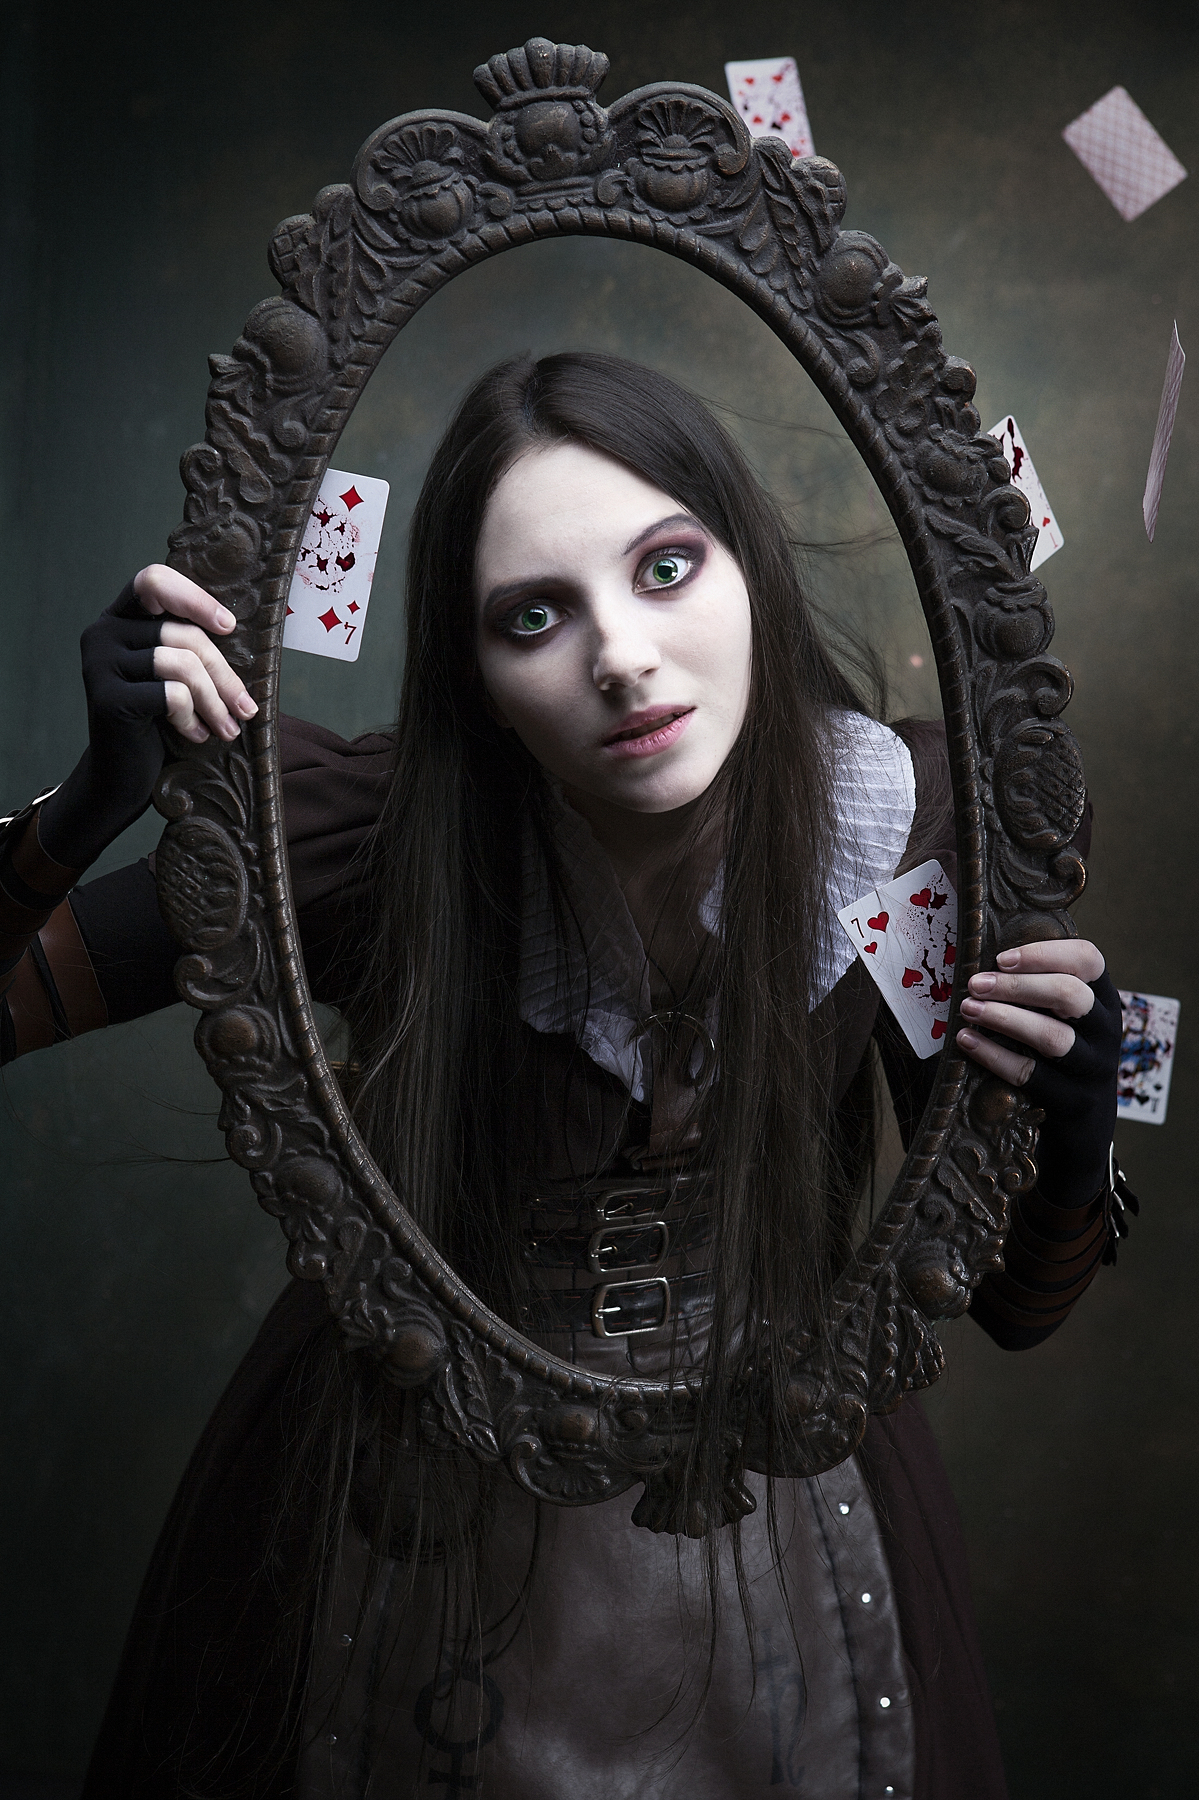 Women Model Fantasy Girl Playing Cards Alice Through The Looking Glass American McGees Alice Cosplay 1199x1800